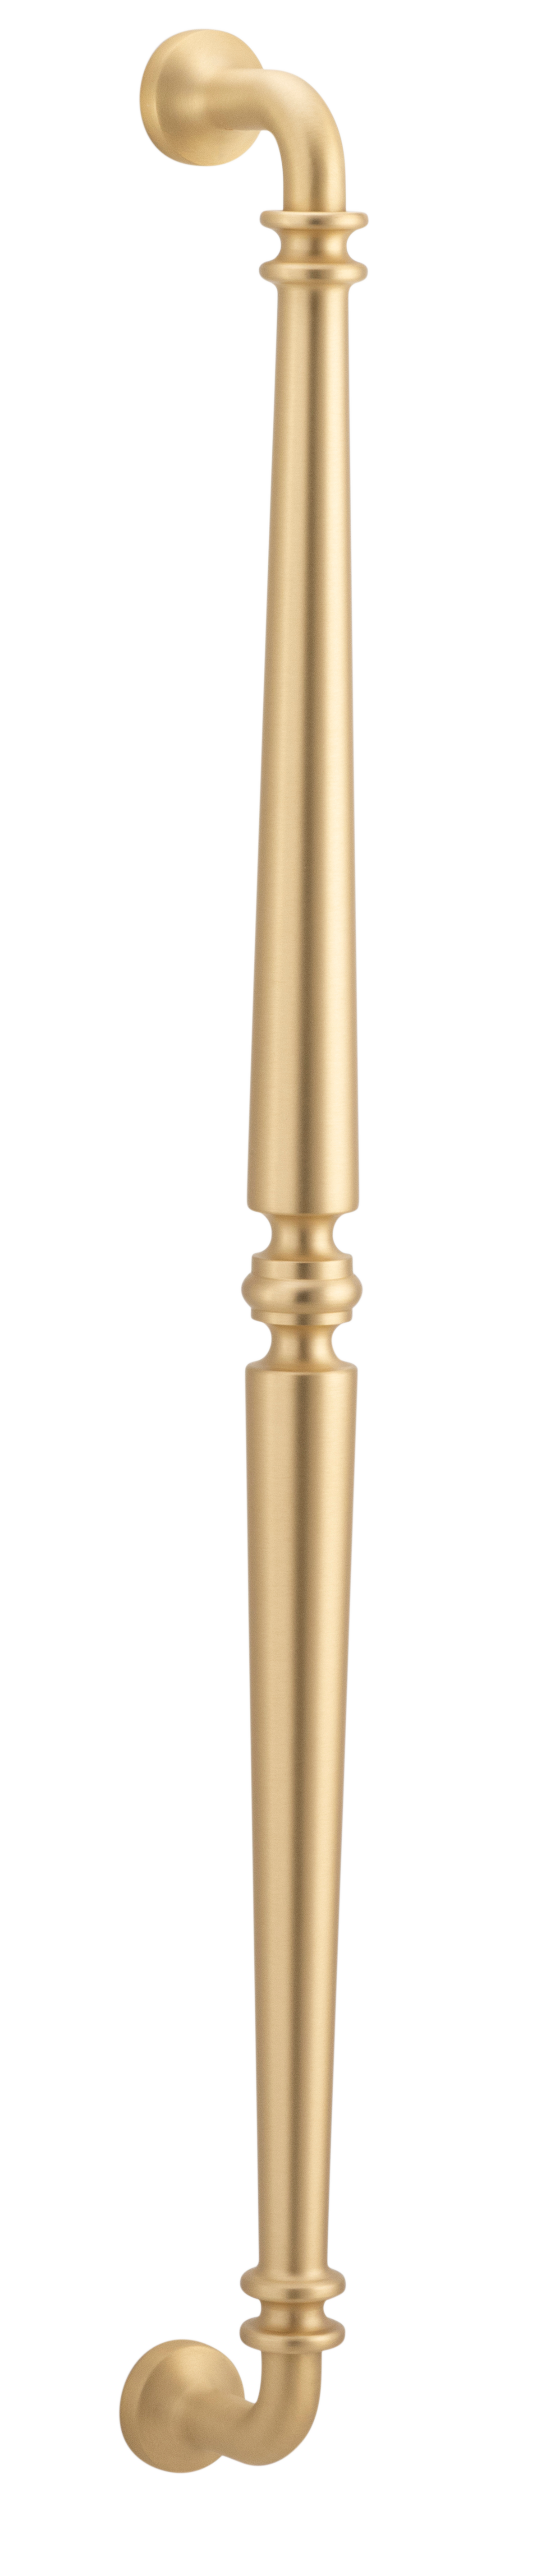 Sarlat Pull Handle Brushed Brass 600mm